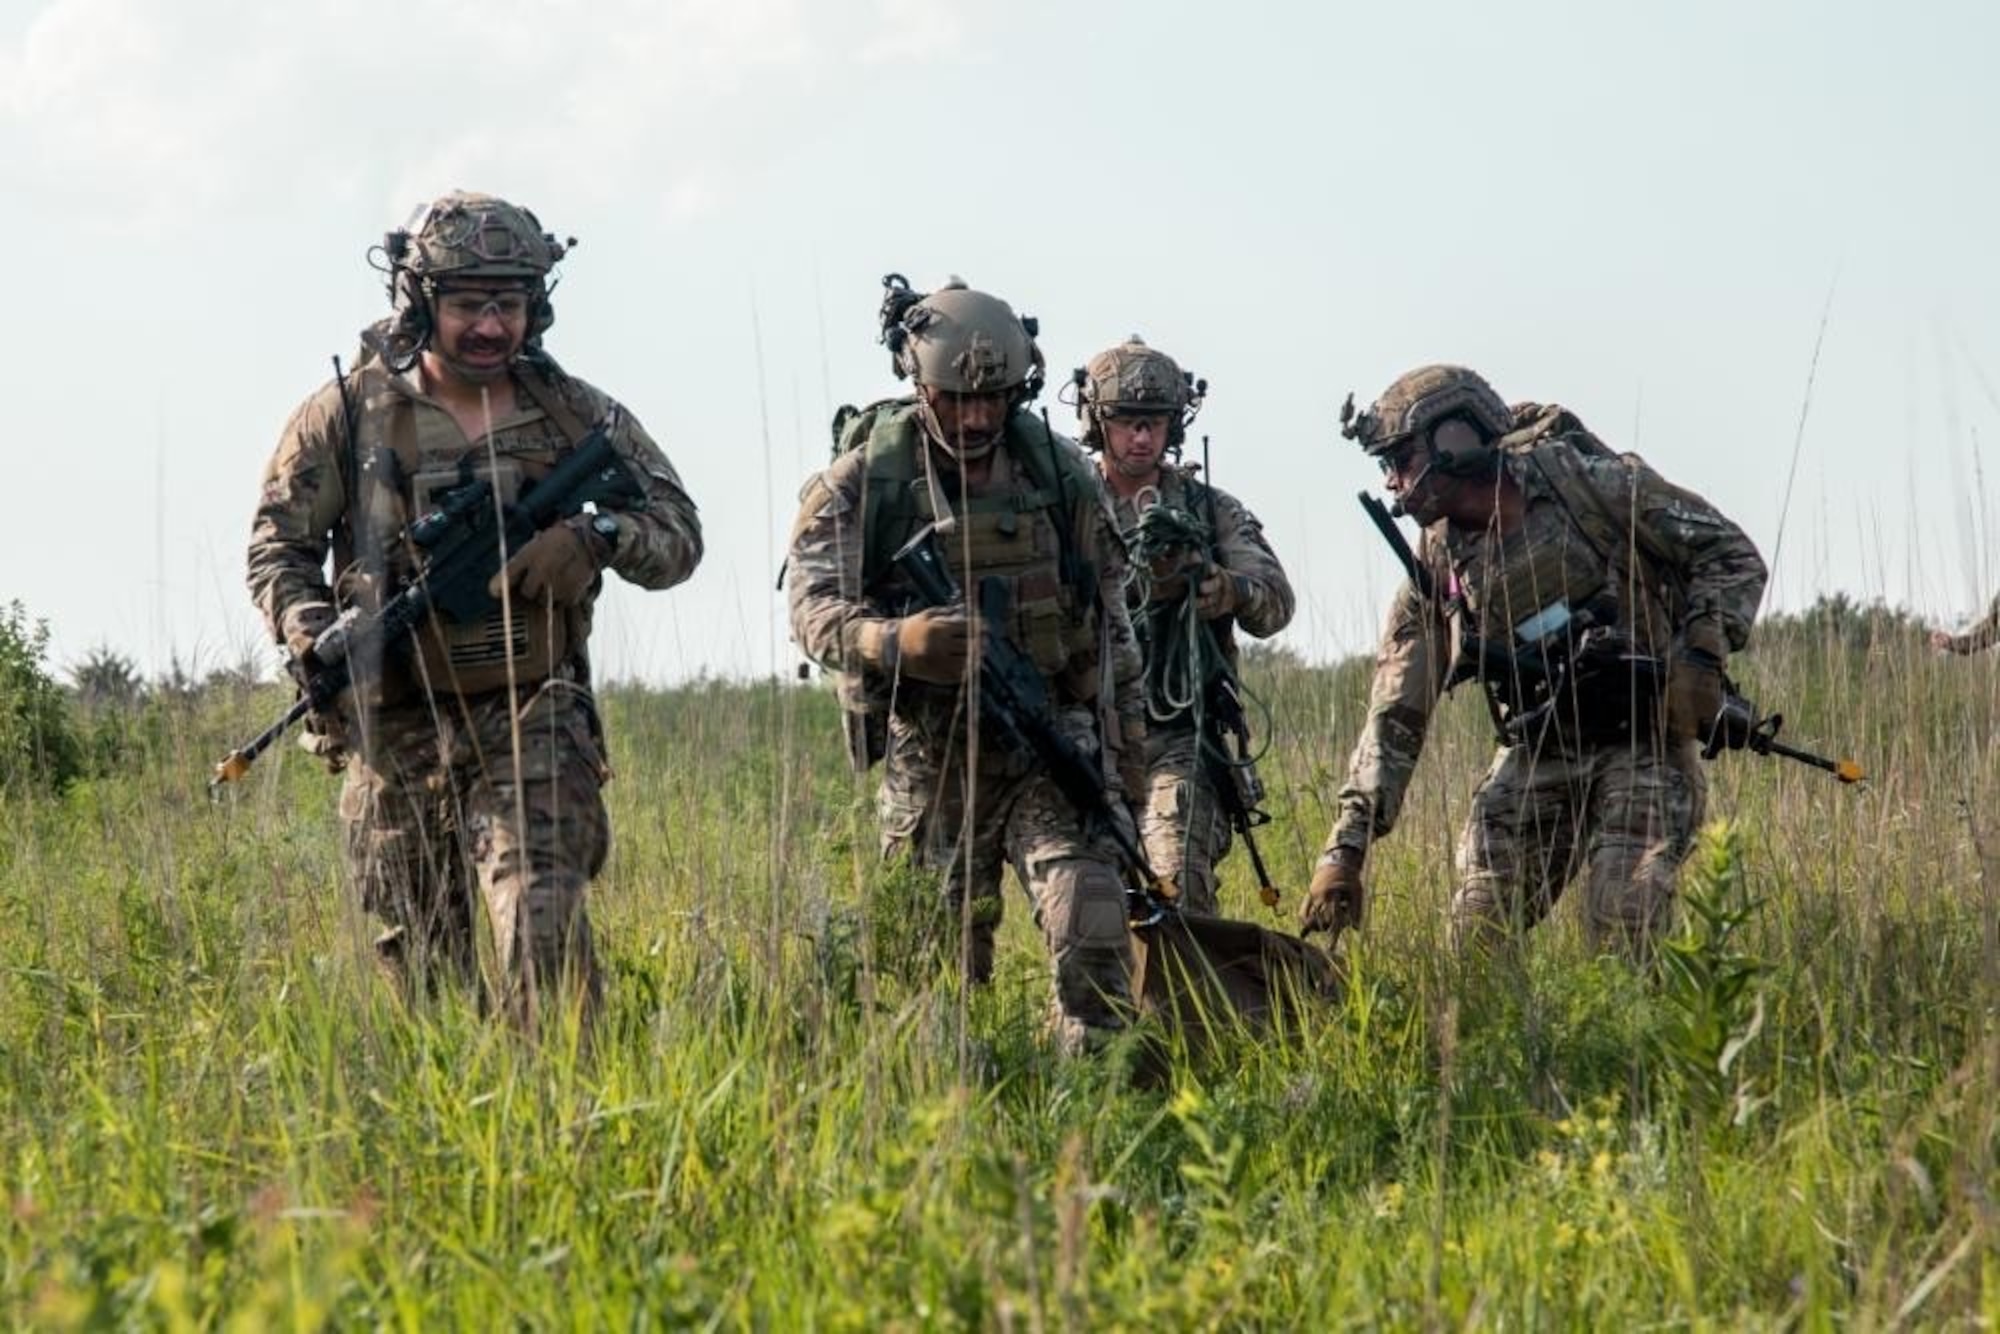 Four Tactical Air Control Party (TACP) Airmen from the 10th Air Support Operations Squadron conduct an area reconnaissance mission as part of joint exercise Gunslinger 22 at Fort Riley Army Post, Kansas, June 24, 2022. Gunslinger 22 integrated U.S. Air Force TACP precision strike team capabilities with U.S. Marine Corps expeditionary air base operations in order to test dynamic force employment options for the supported commander. (Courtesy photo)